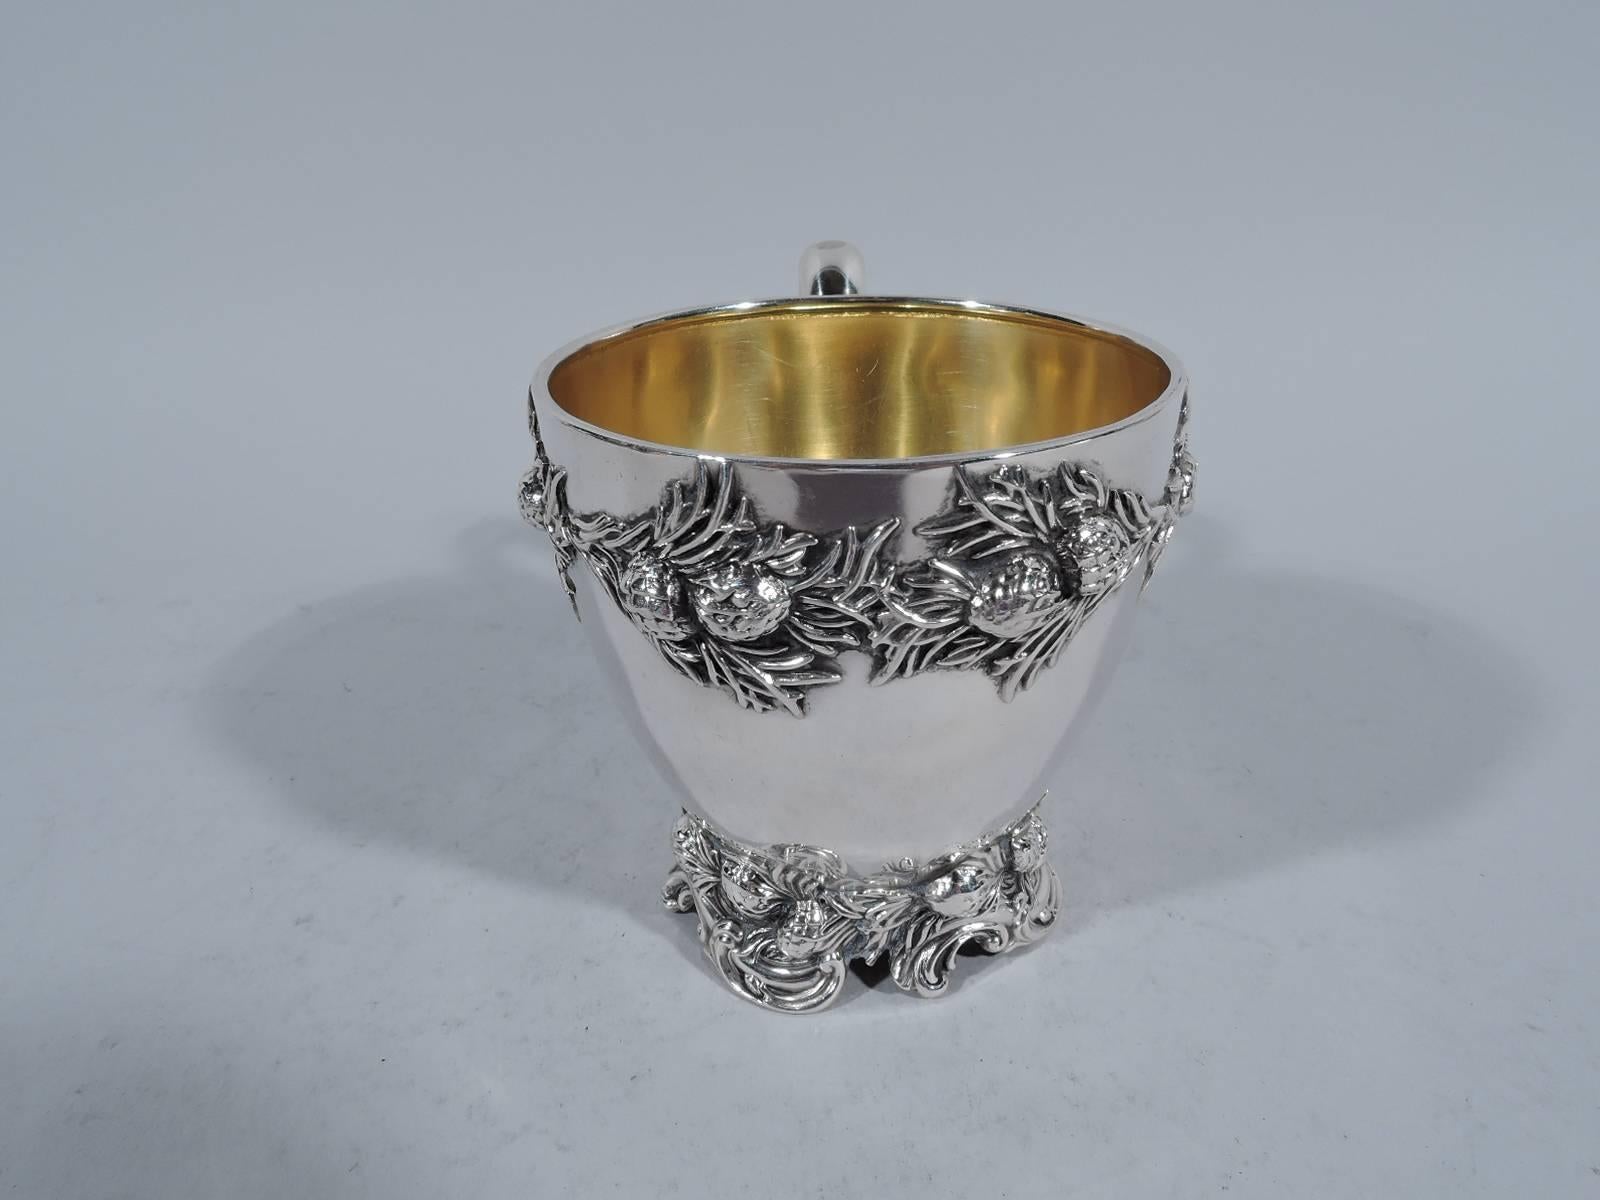 Sterling silver baby cup. Made by Black, Starr & Frost in New York, circa 1890. Tapering bowl, scroll handle, and raised foot. Pine branch with cones applied to rim and foot. Gilt interior. Hallmark includes no. 2871. Weight: 5.4 troy ounces.